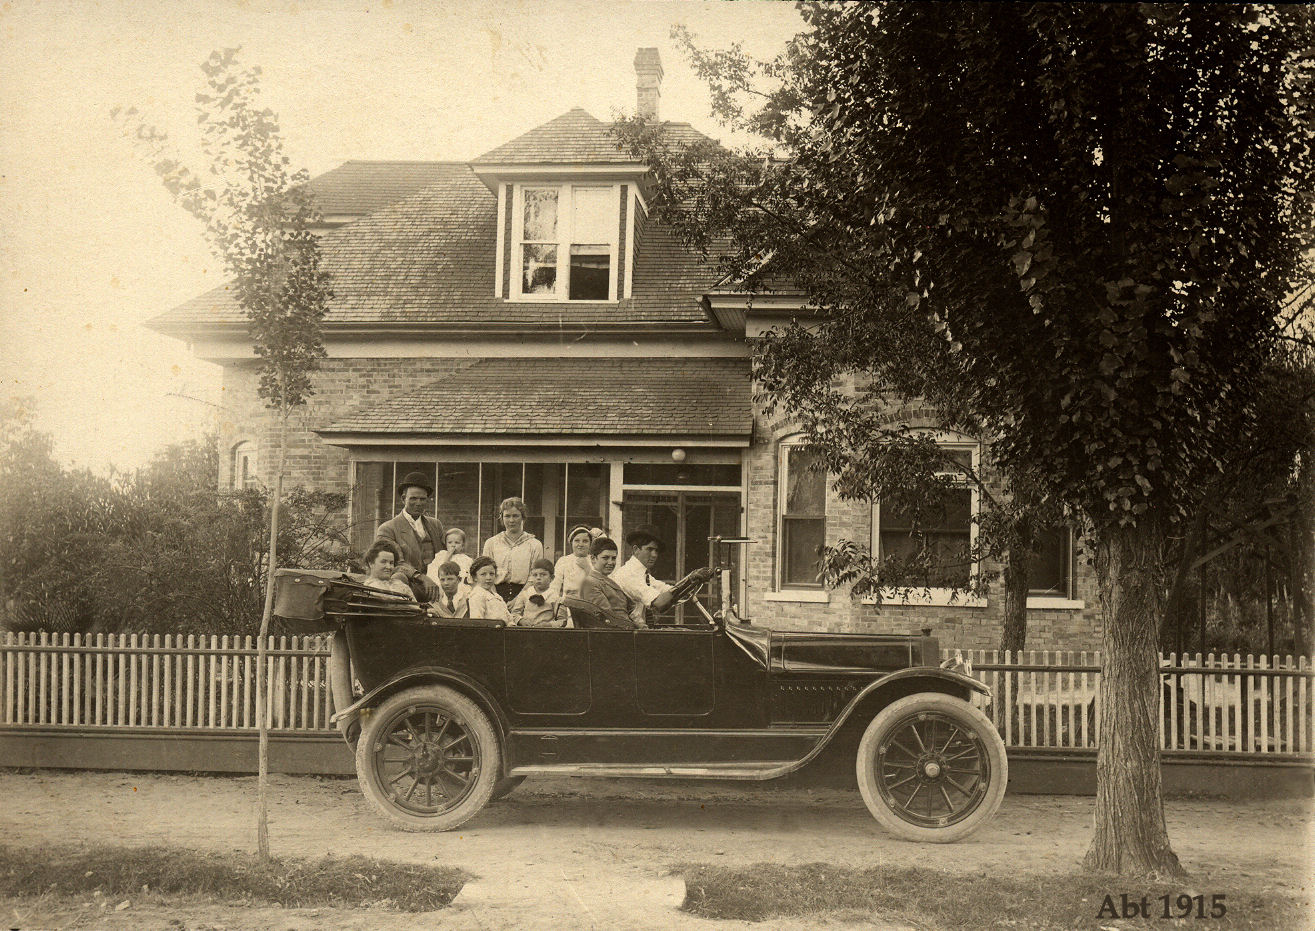 WCHS-01090 Mary Cox family in their new car about 1915